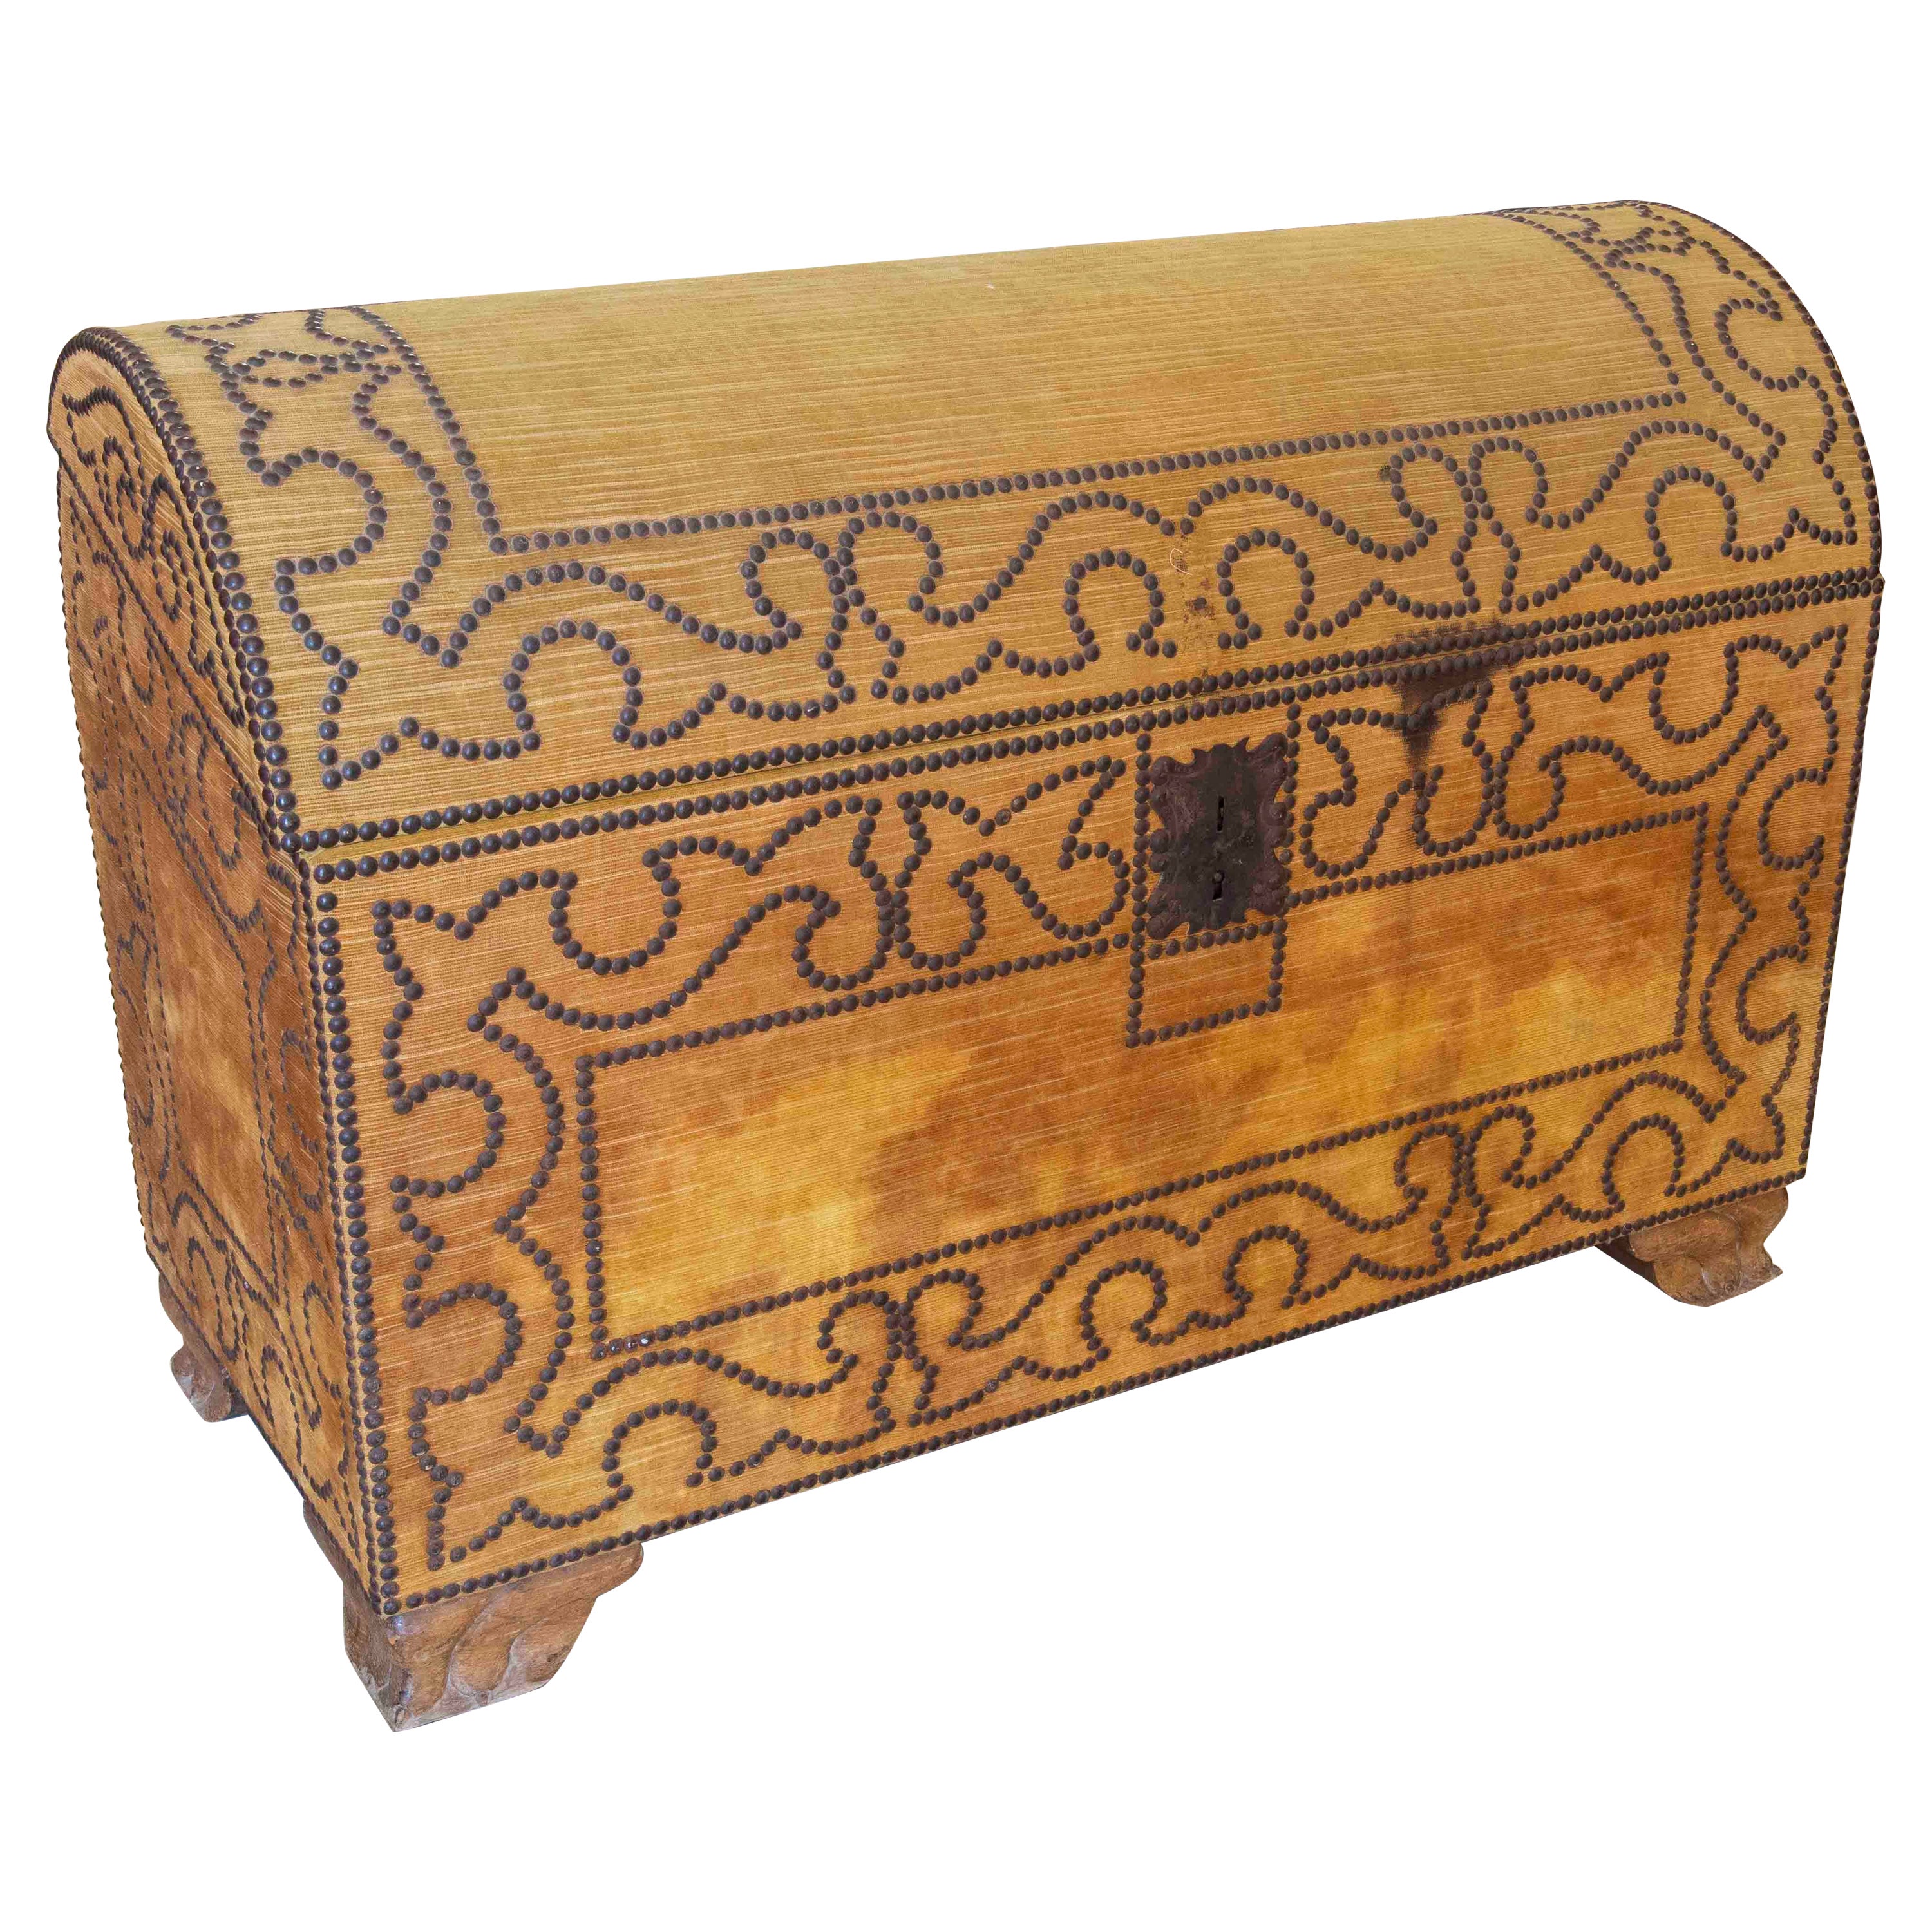 19th Century Spanish Wooden Trunk Lined with Yellow Velvet Fabric